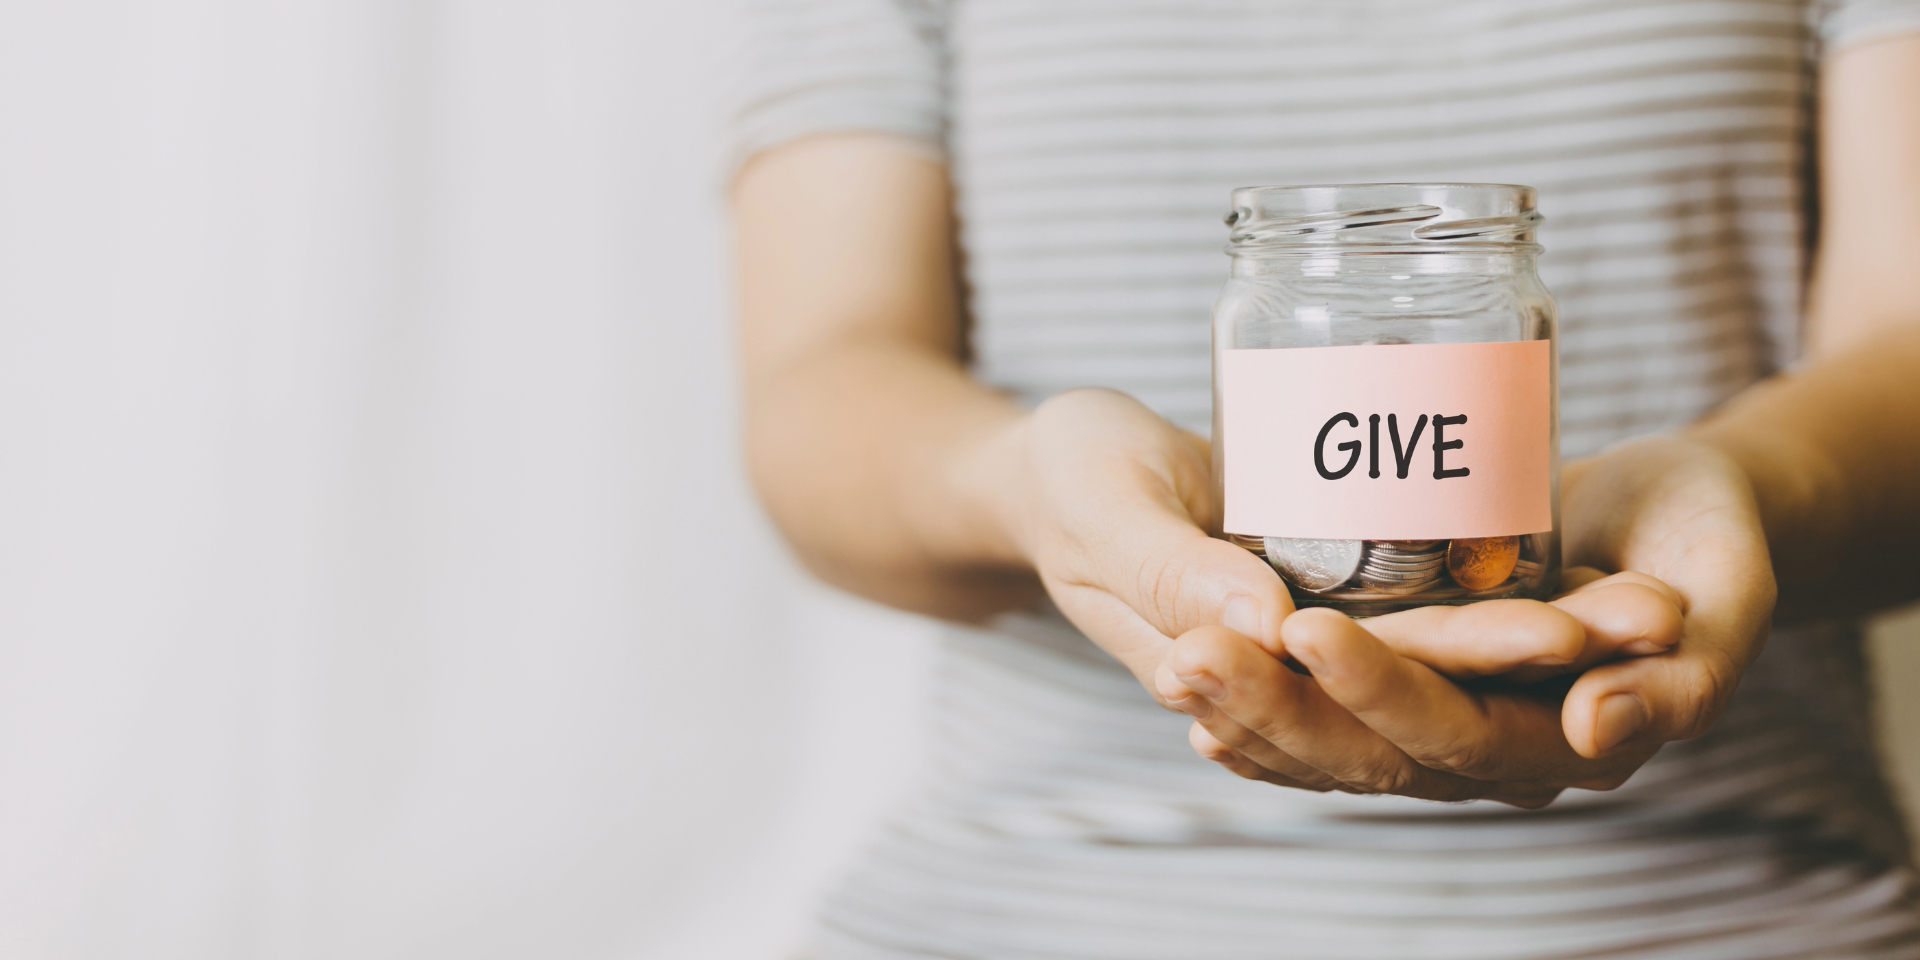 How to give your money away and make it count